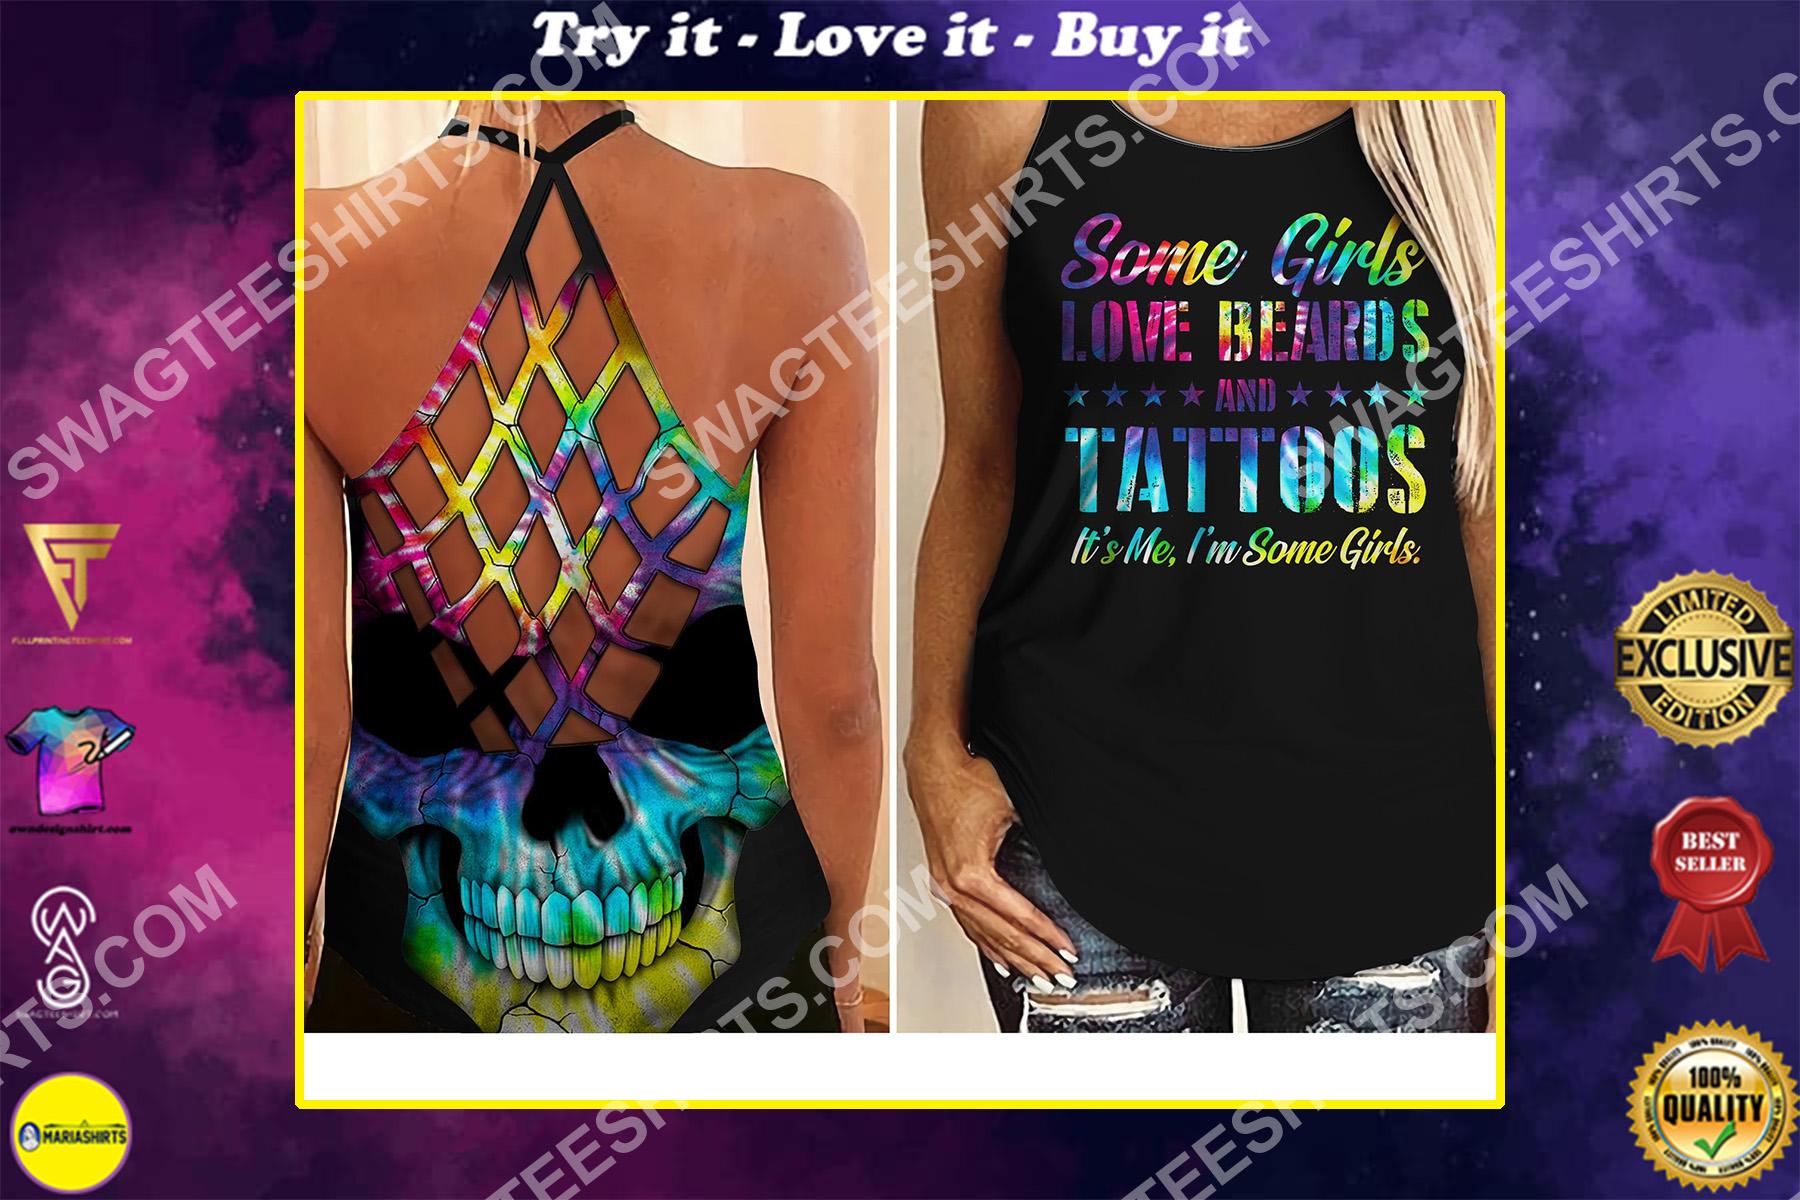 some girls love beards and tattoos it's me i'm some girls criss-cross tank top